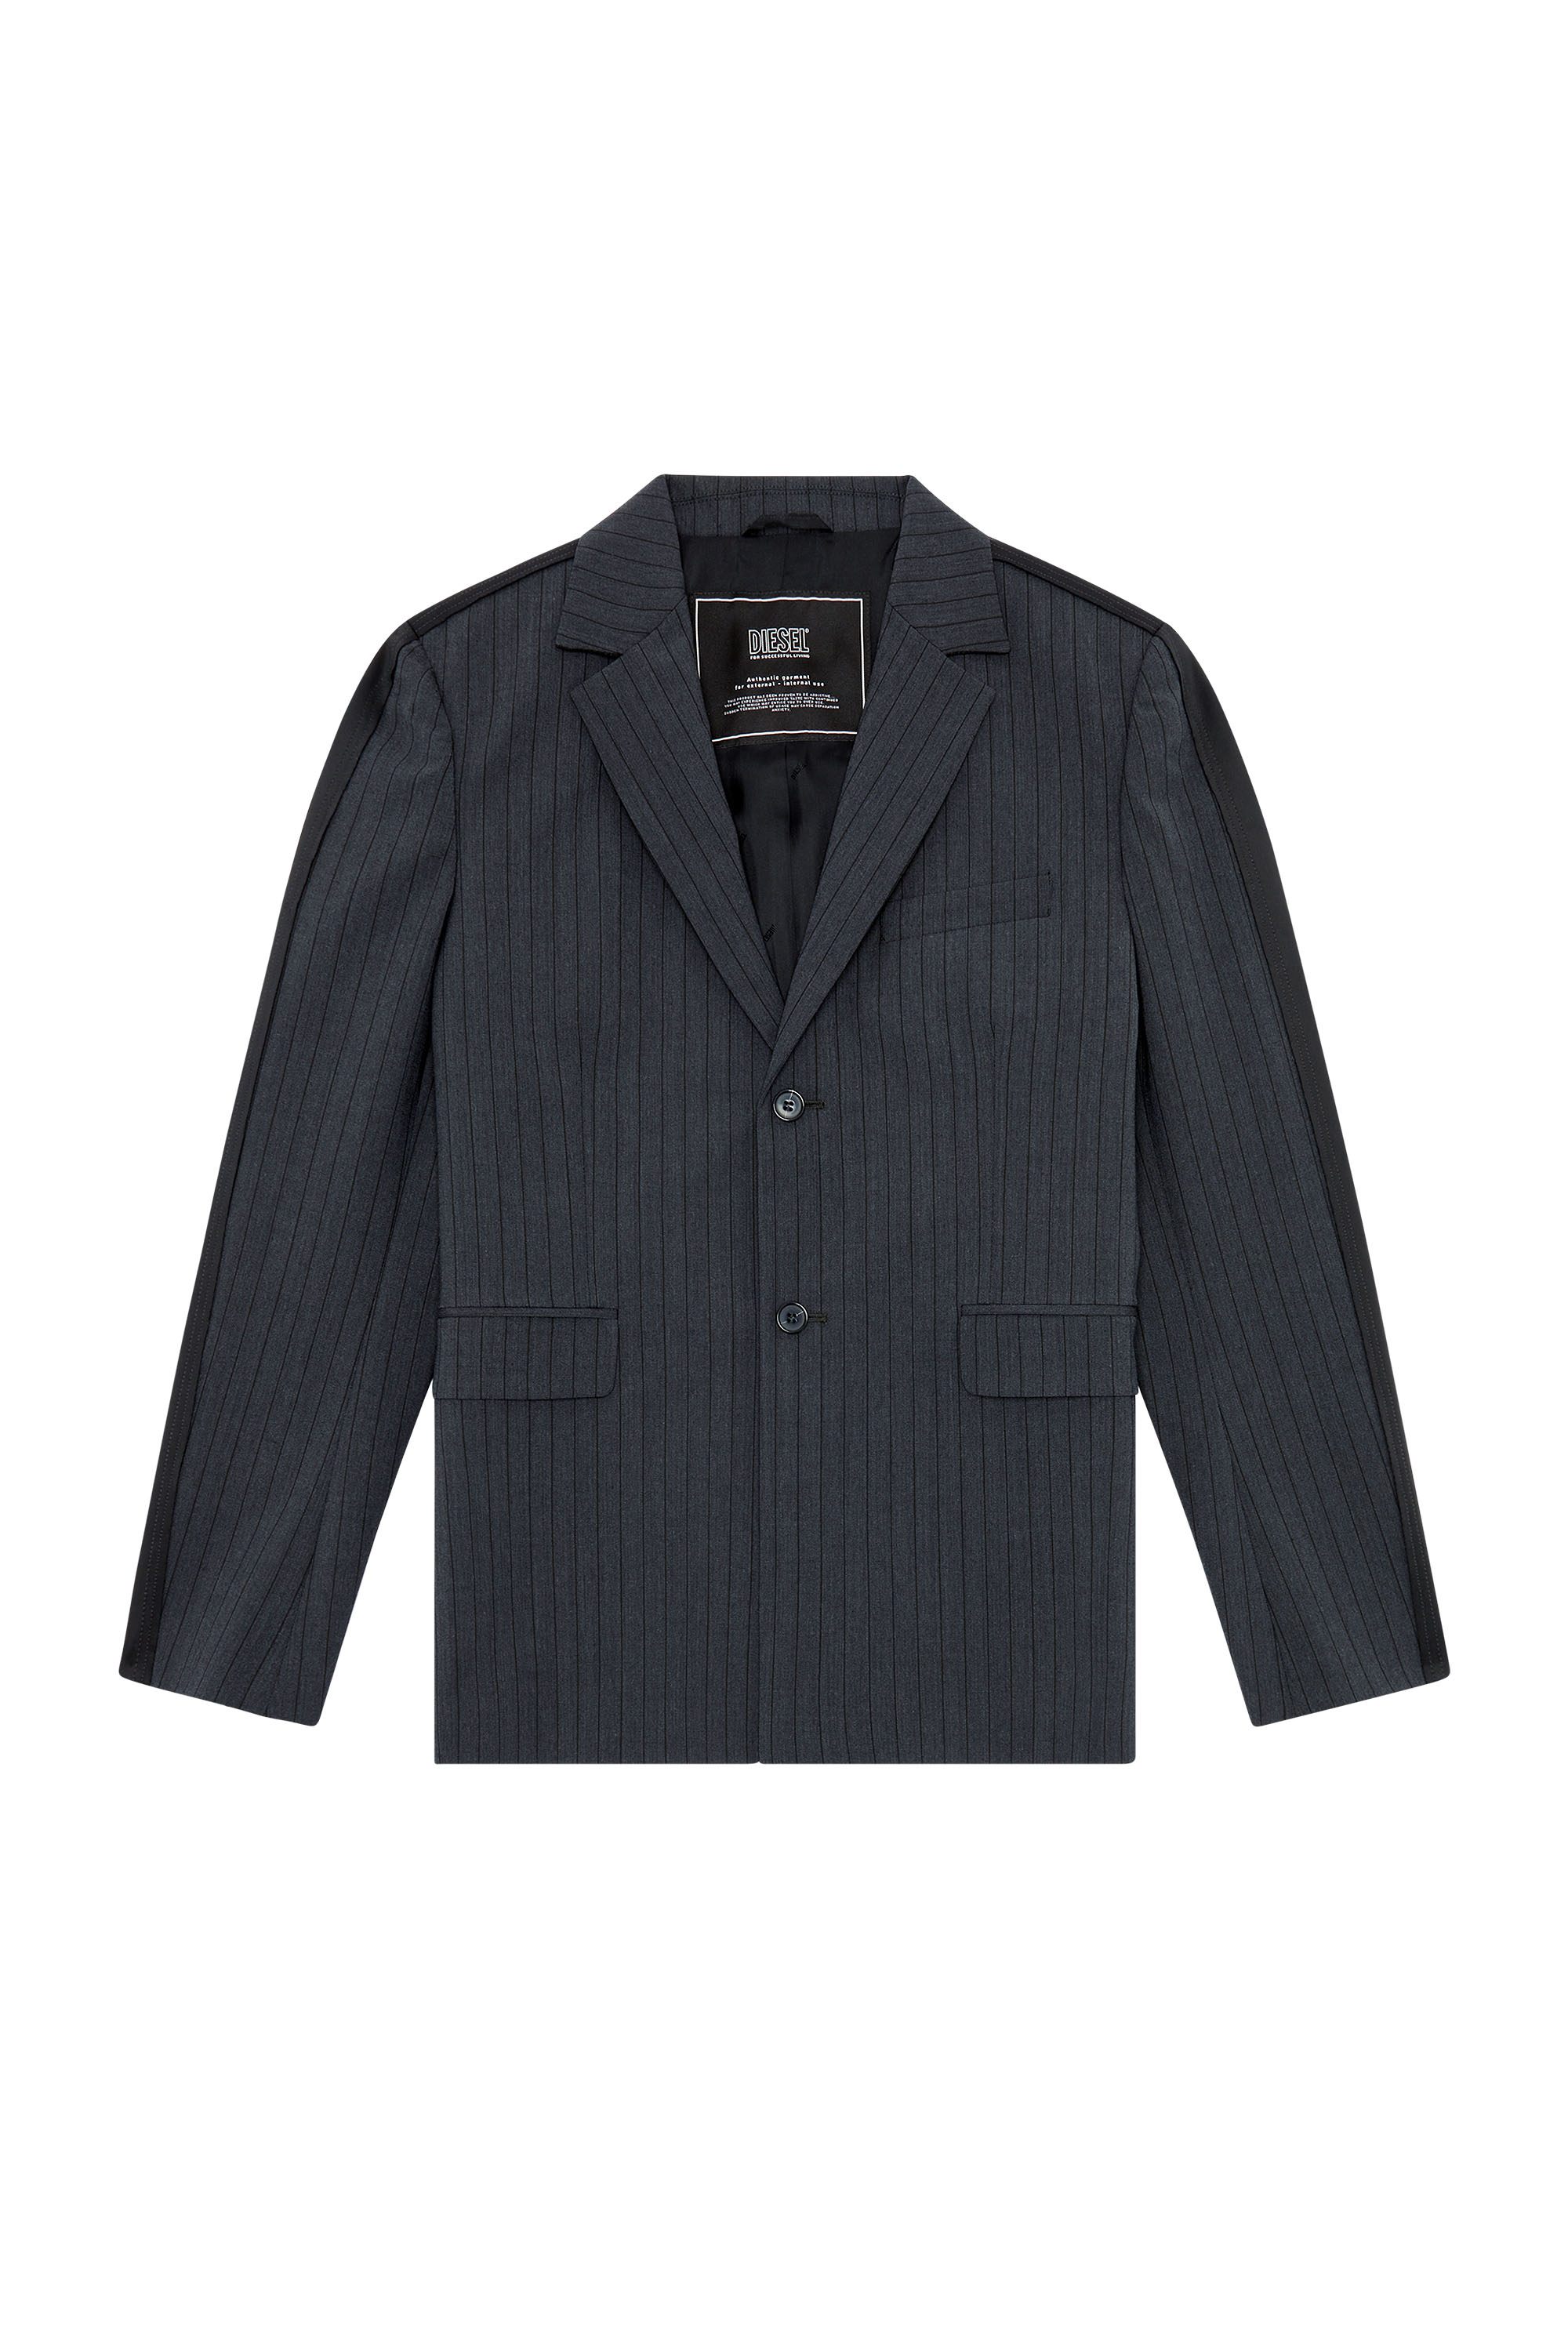 Diesel - J-WIRE, Man Blazer in pinstriped cool wool and jersey in Grey - Image 3